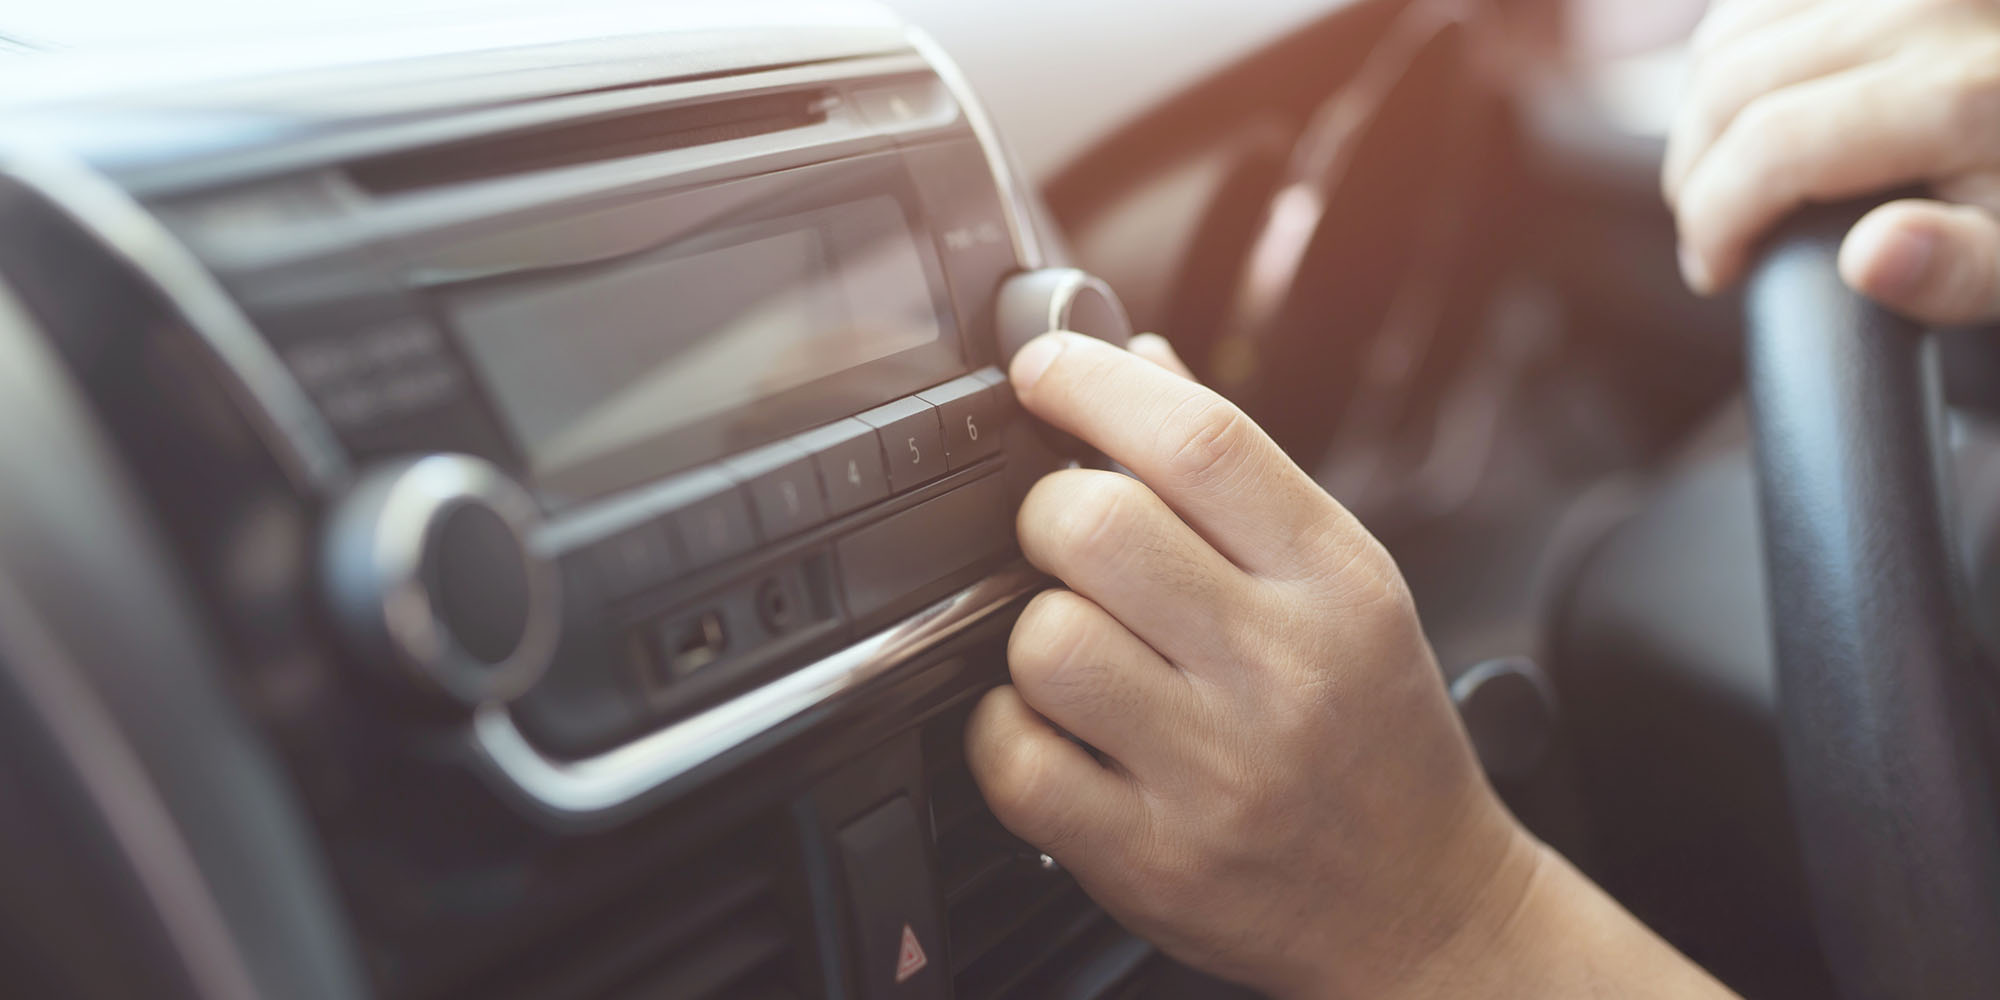 How to stream music in an old car